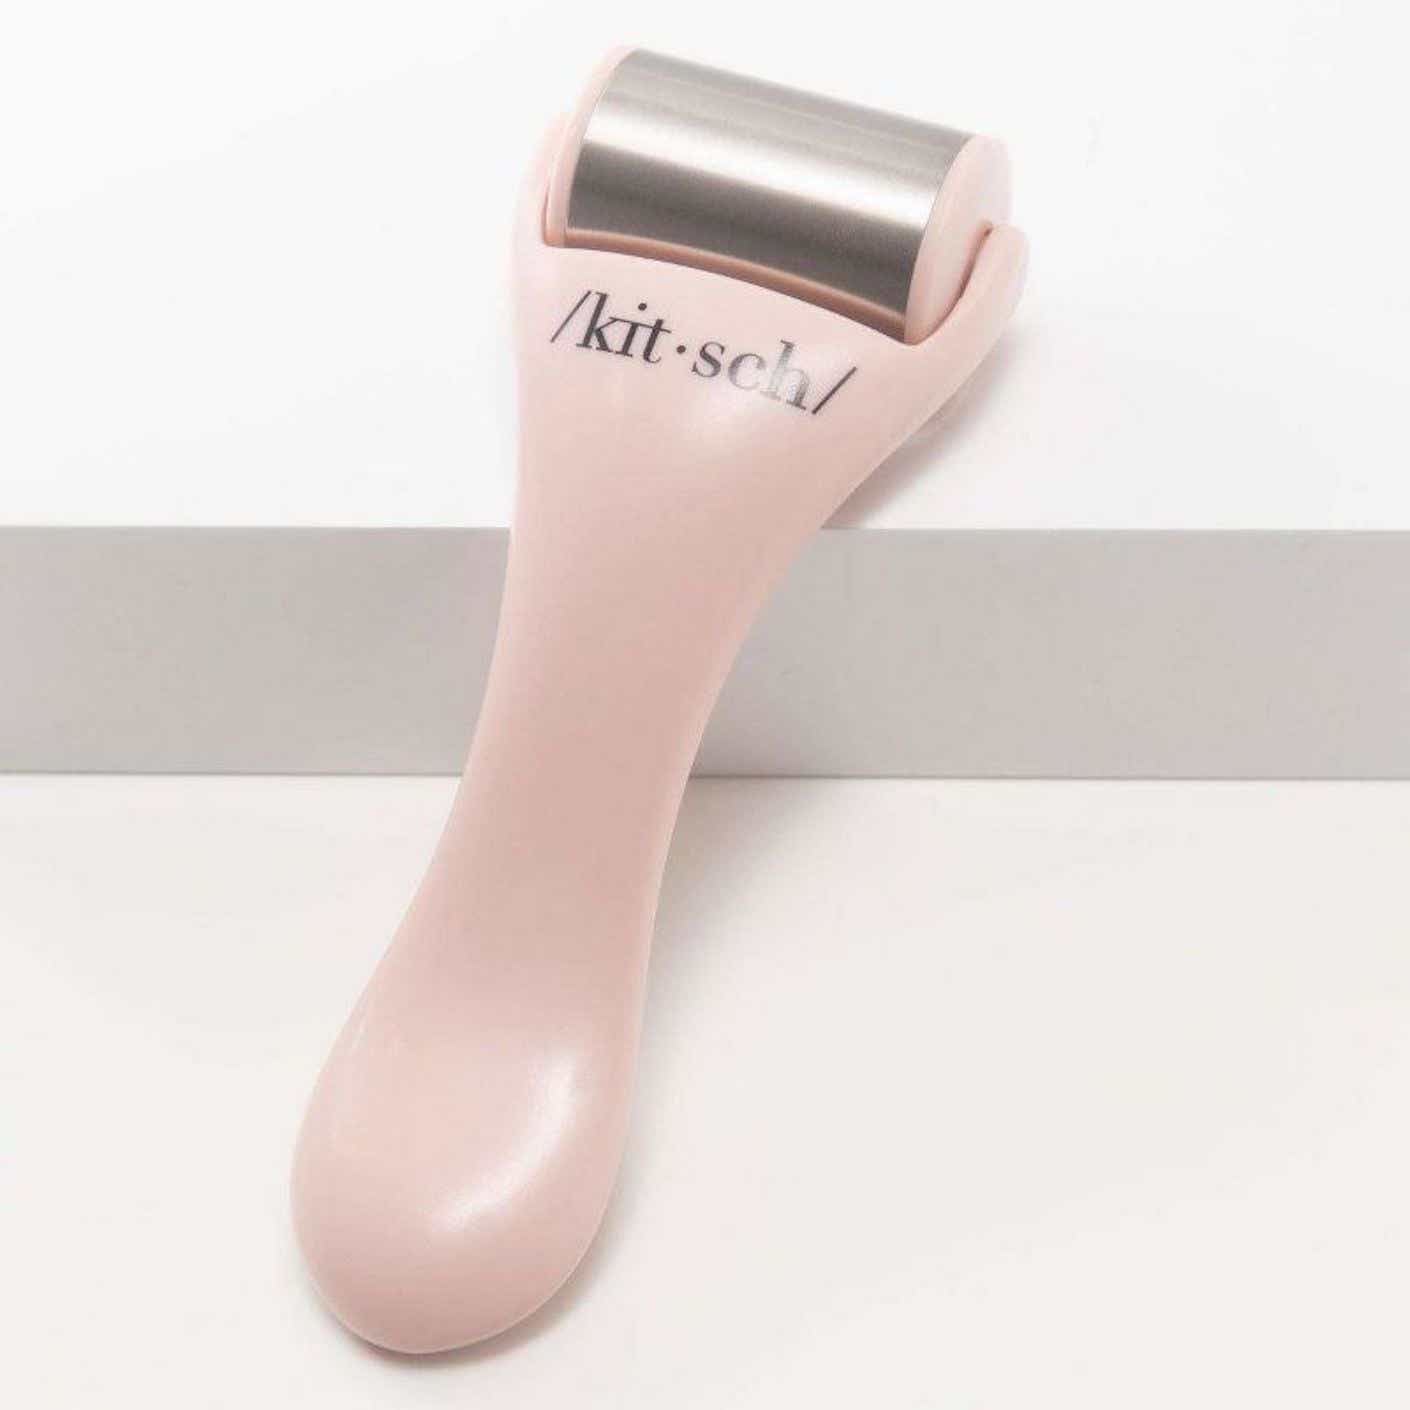 A picture of a light pink plastic ice roller with a metal head.